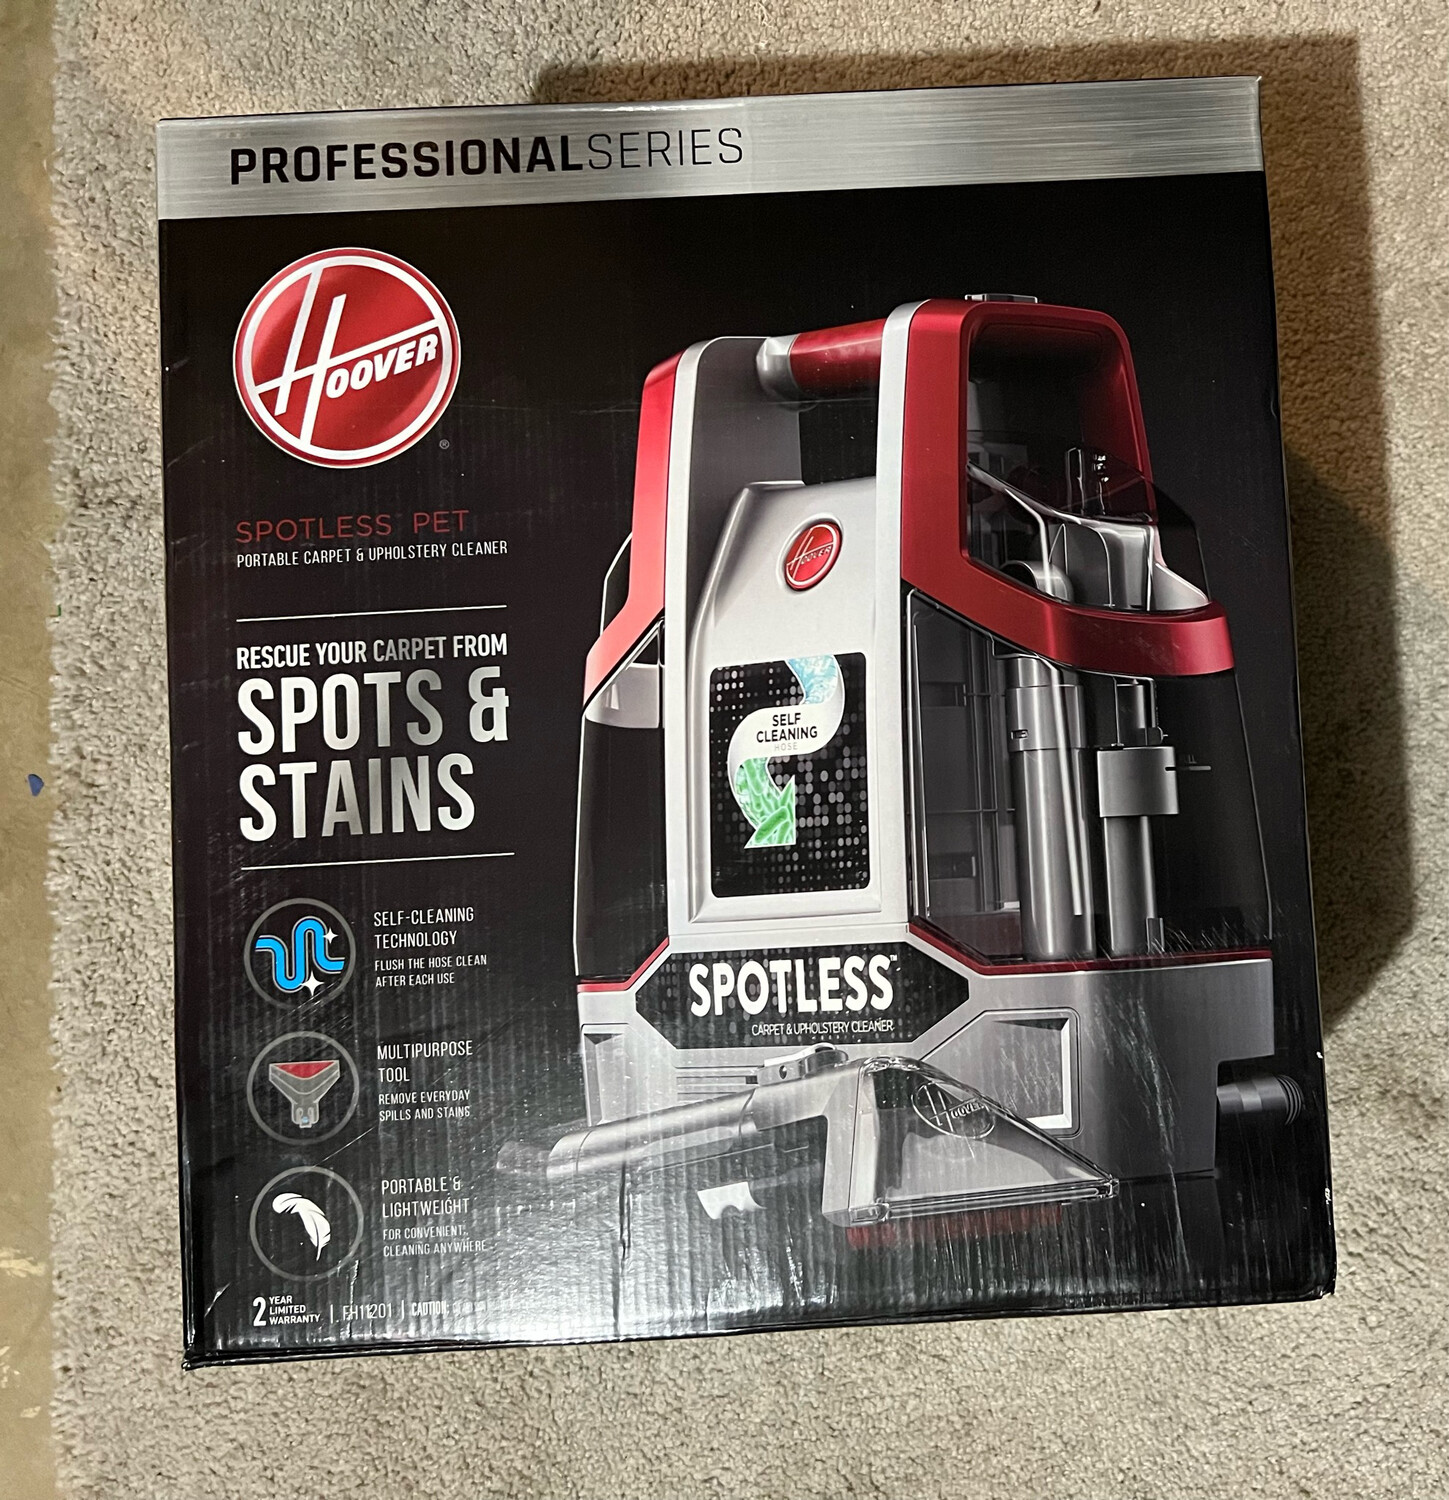 Hoover Professional Series Spotless Portable Carpet Cleaner FH11201